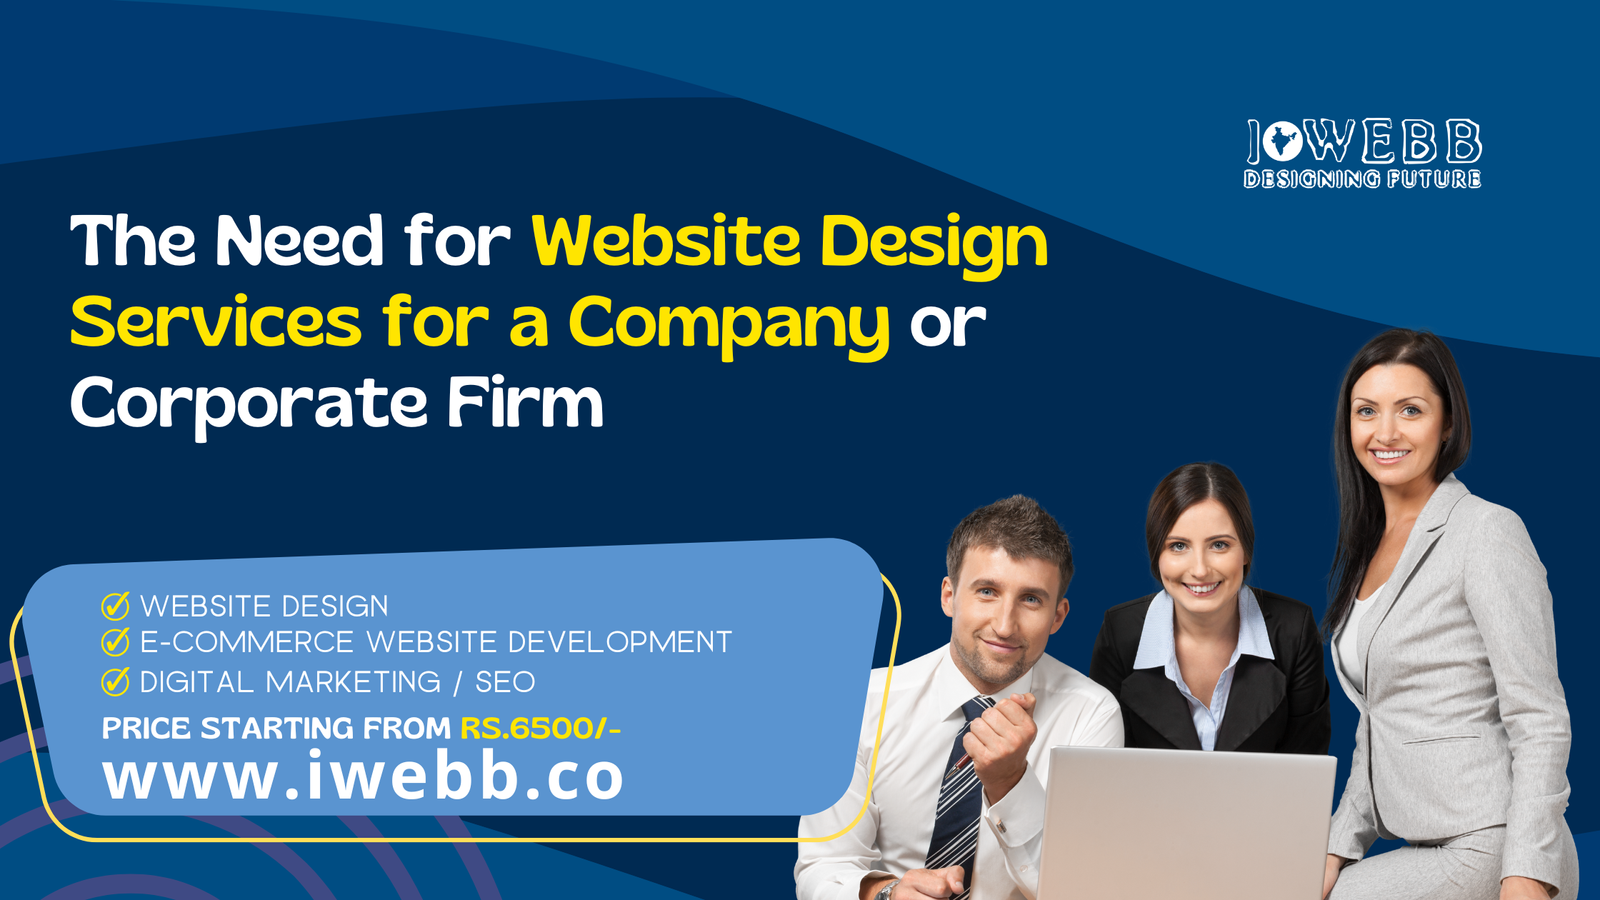 The Need for Website Design Services for a Company or Corporate Firm